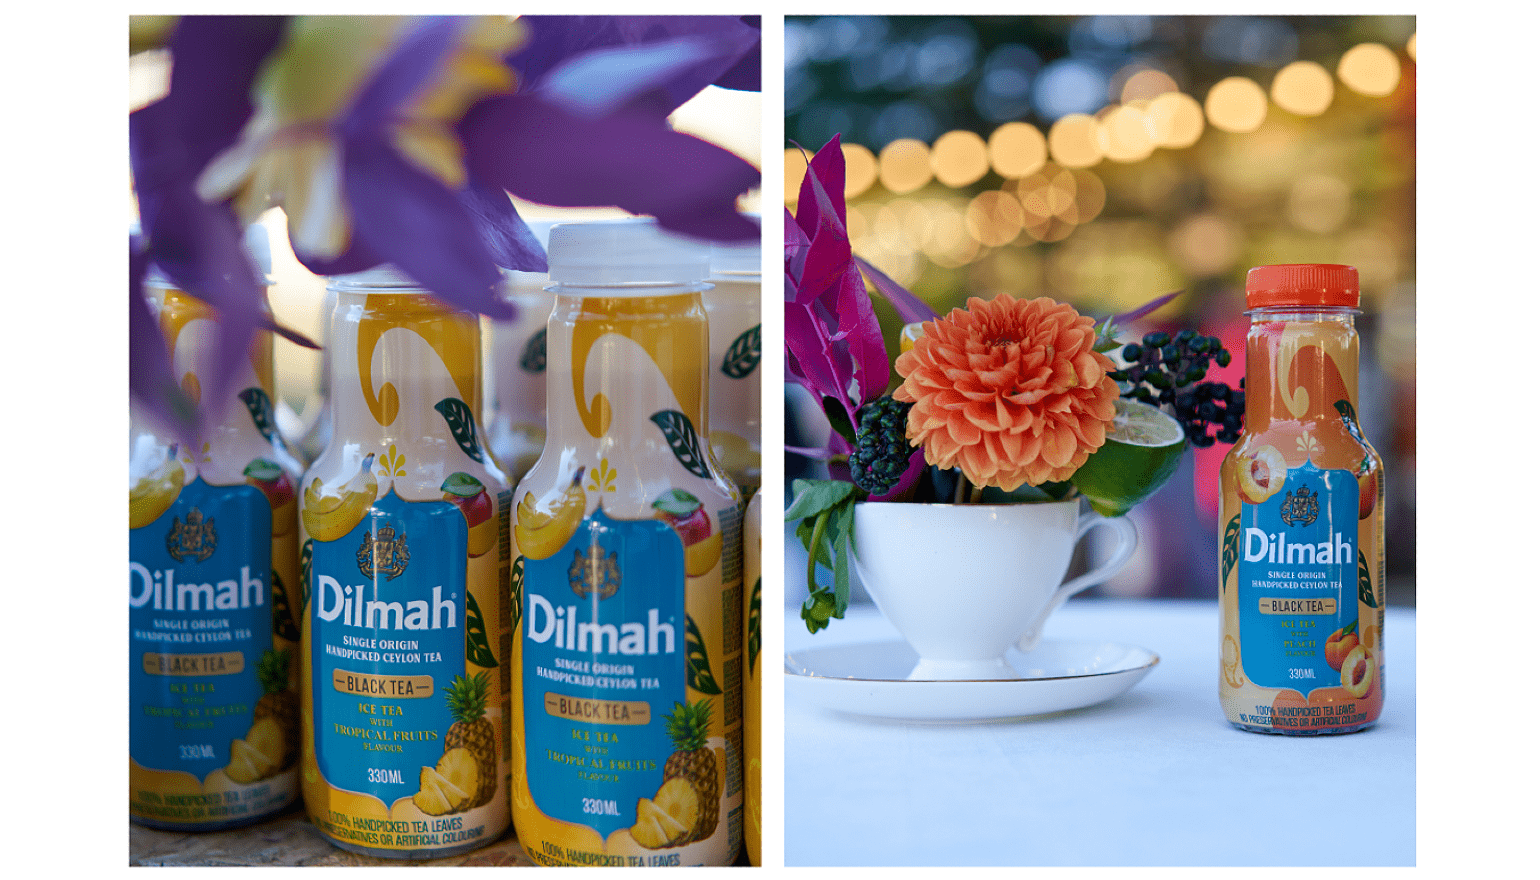 Dilmah Iced Tea is Now Available in Georgia